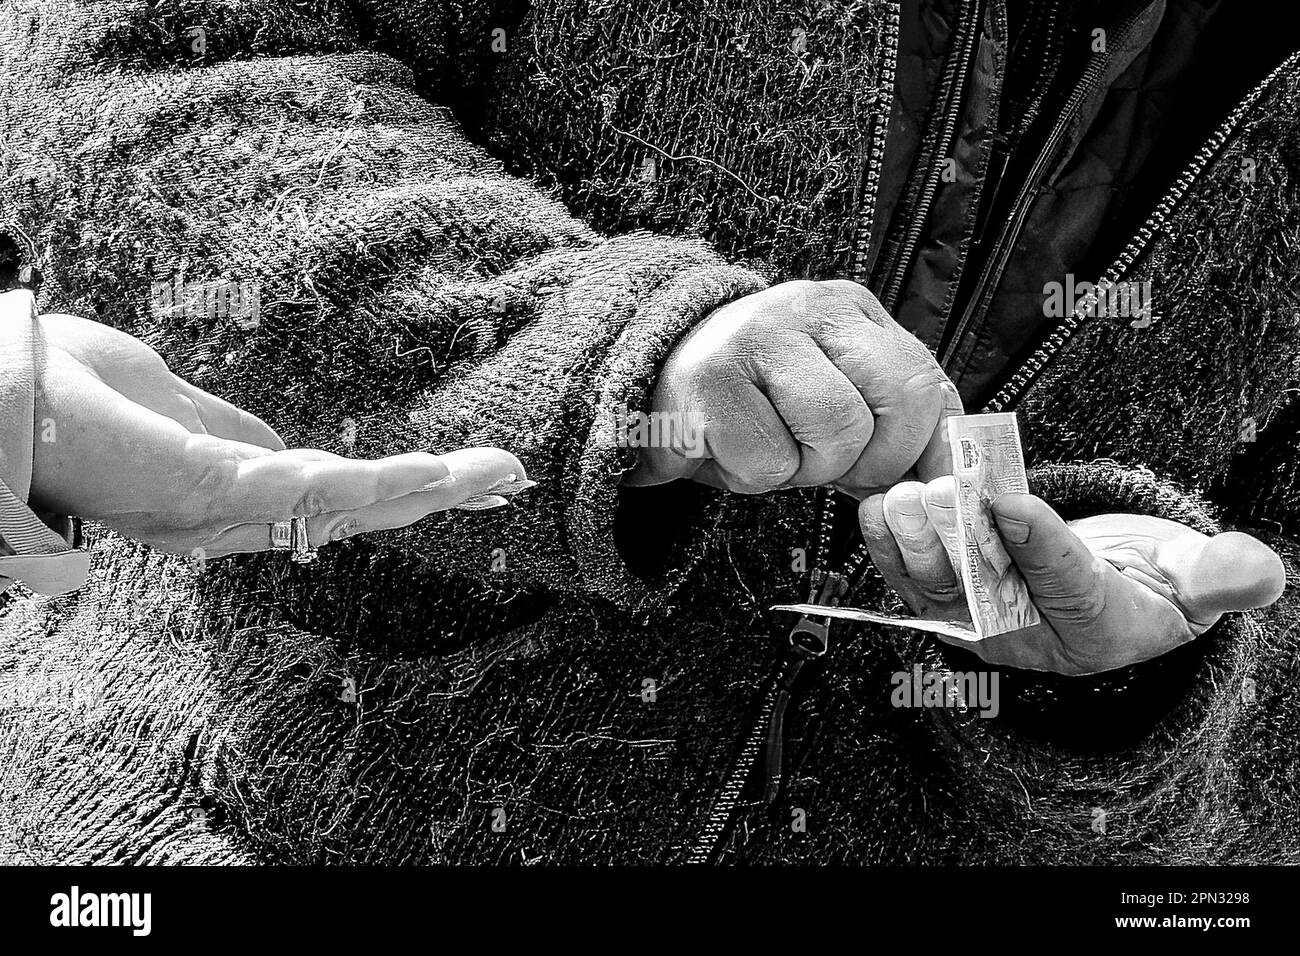 Transfer of money from hand to hand. Concept of trade, business, retail, sales, cash sale, currency, buying and selling, finance, cash economy. Stock Photo